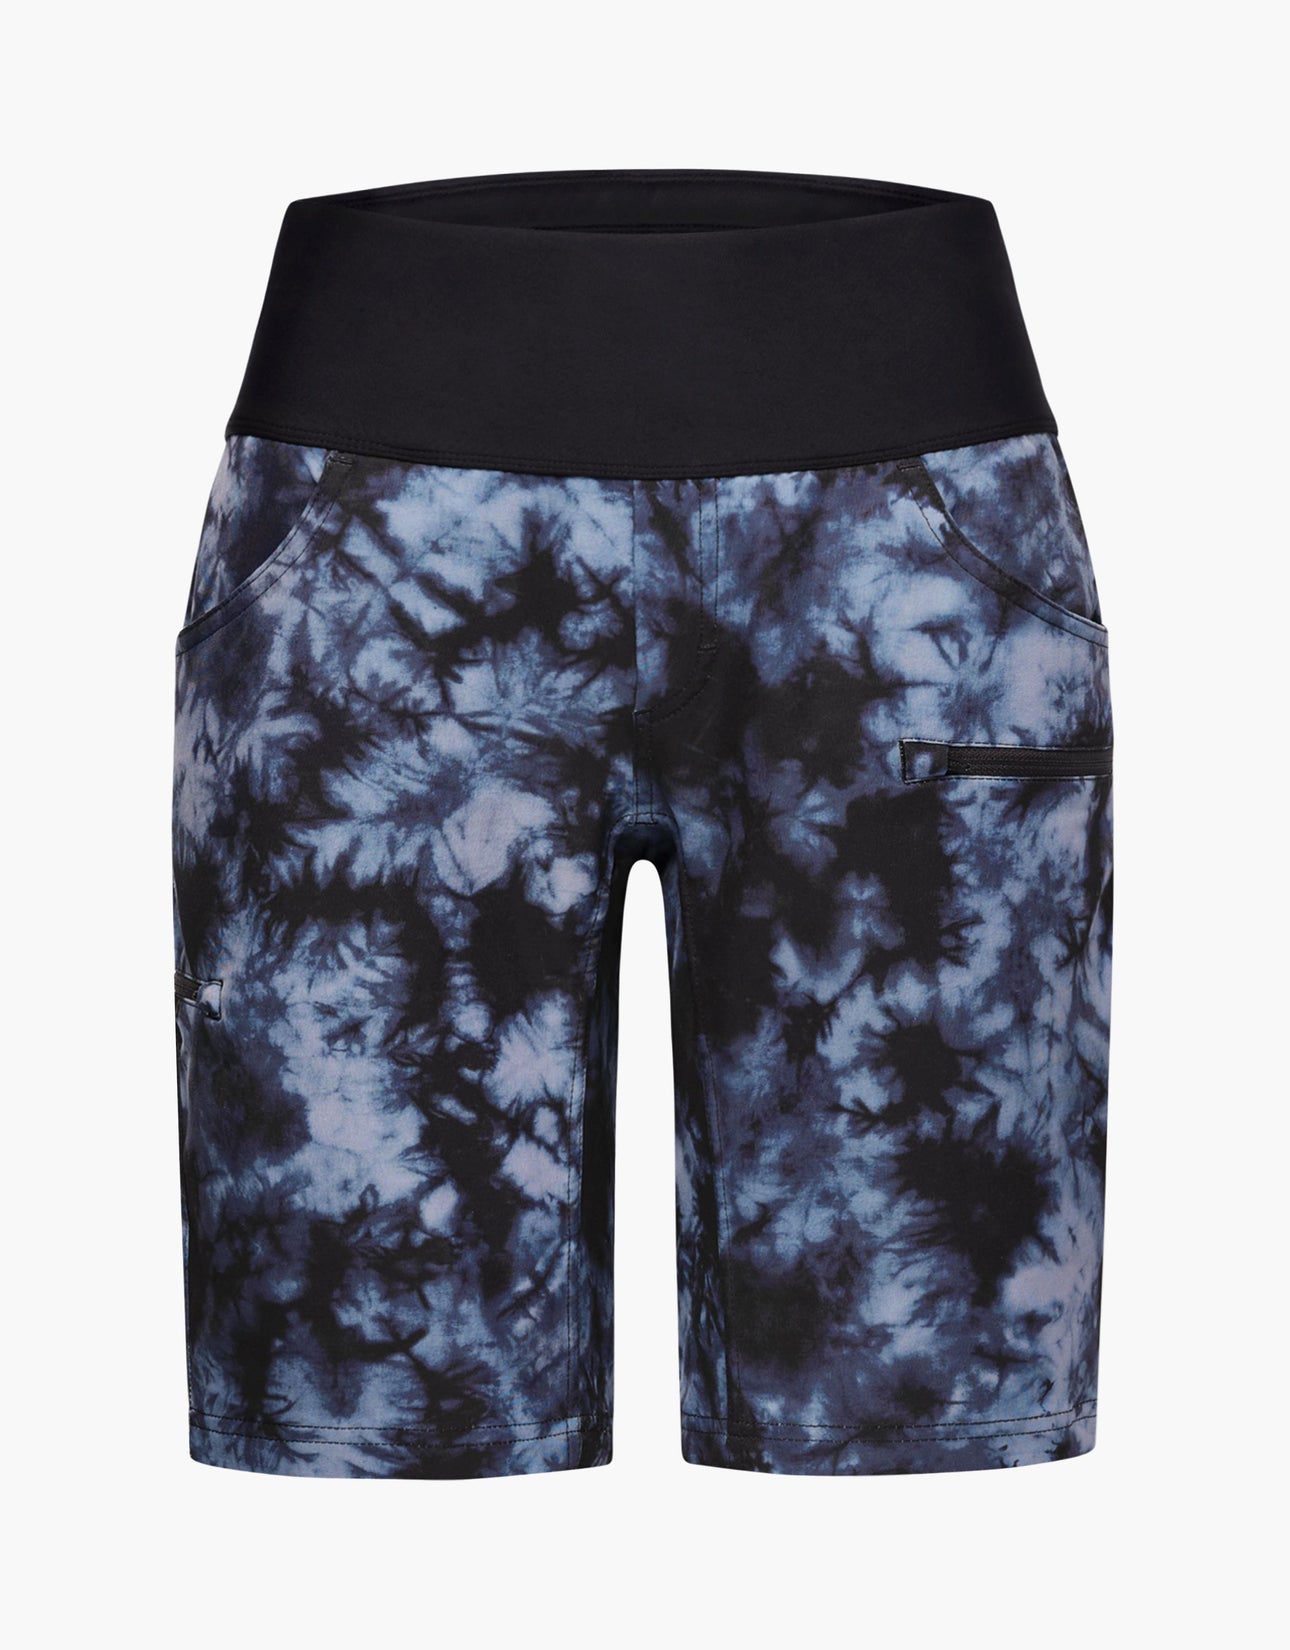 Limitless - Stretch Waistband High-Rise Pant : Graphite Tie Dye